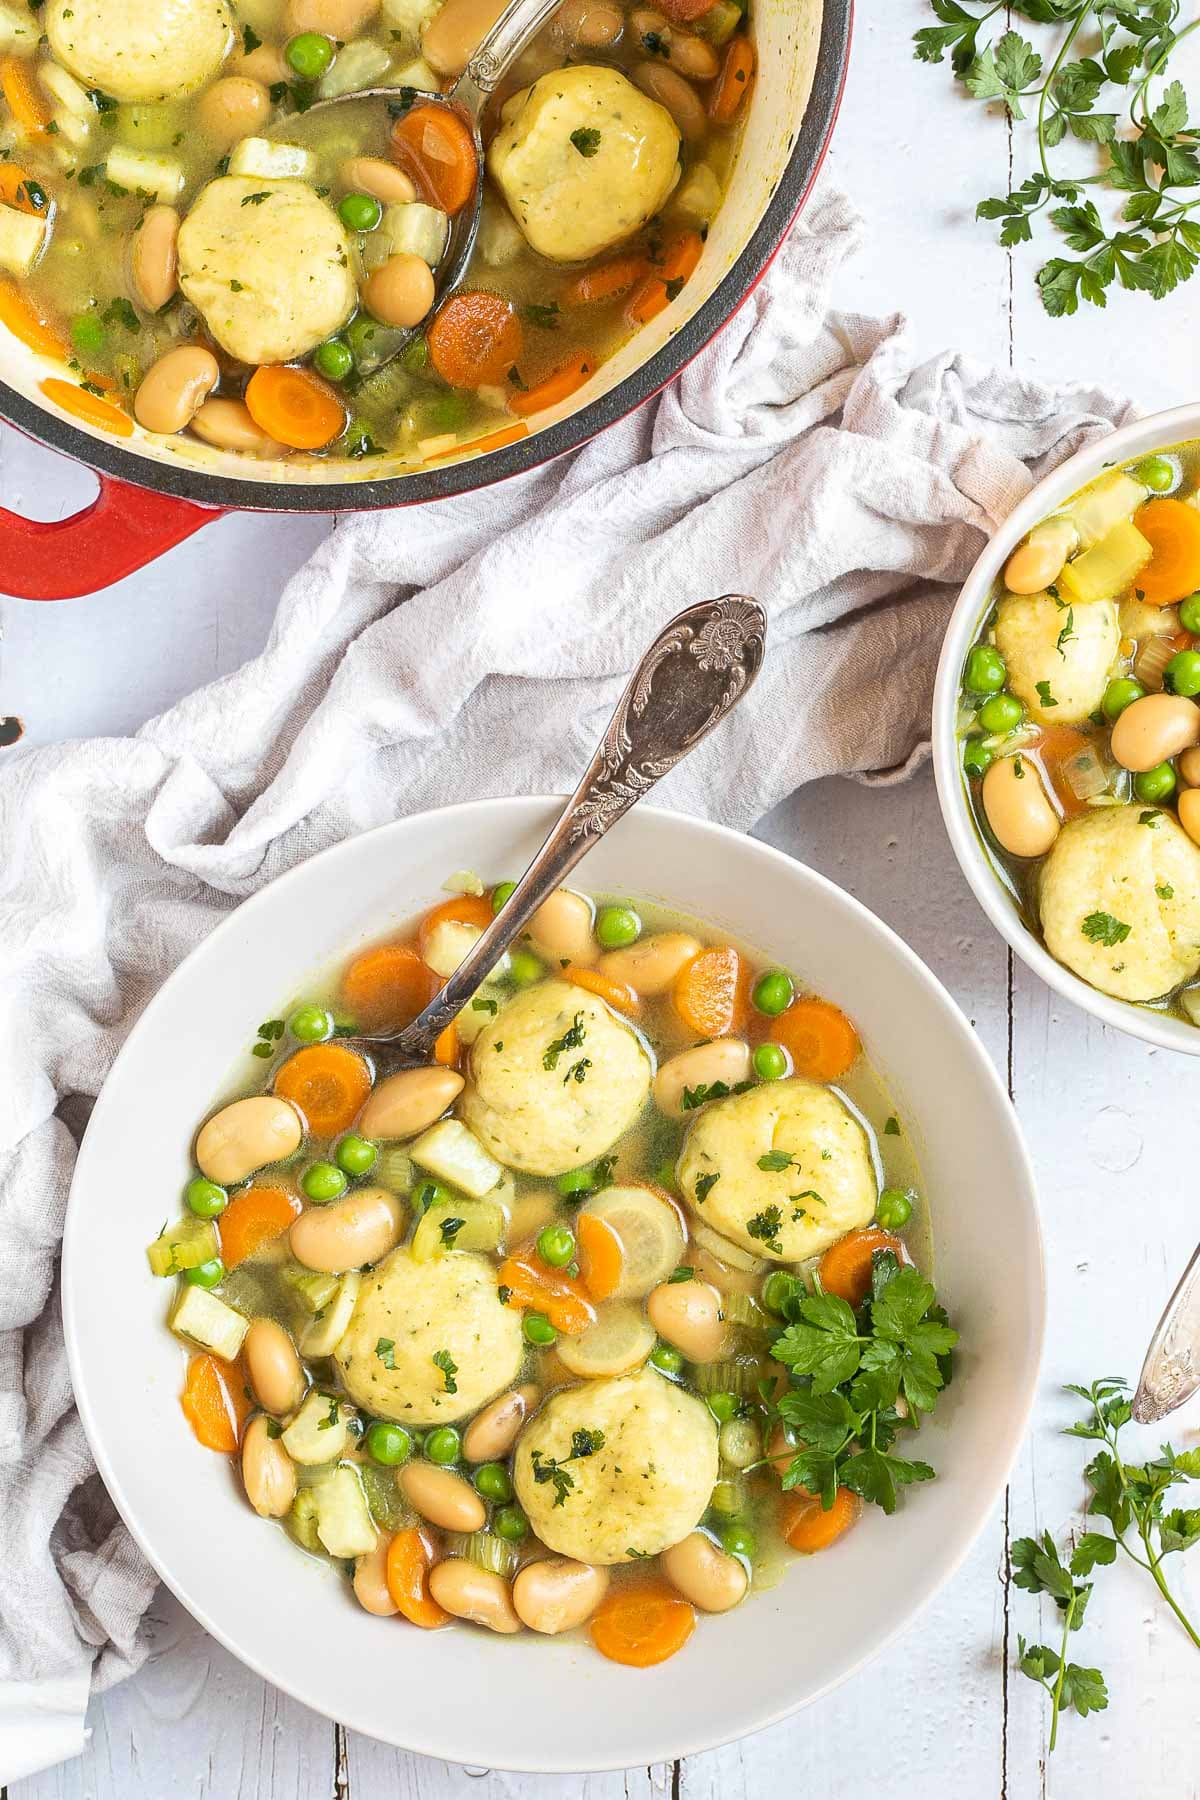 Two white plates with dumplings, chopped veggies, green herbs, white beans, and green peas in a vegetable broth soup. A spoon is placed in it. The remaining soup is in a red white enameled Dutch oven next to it.